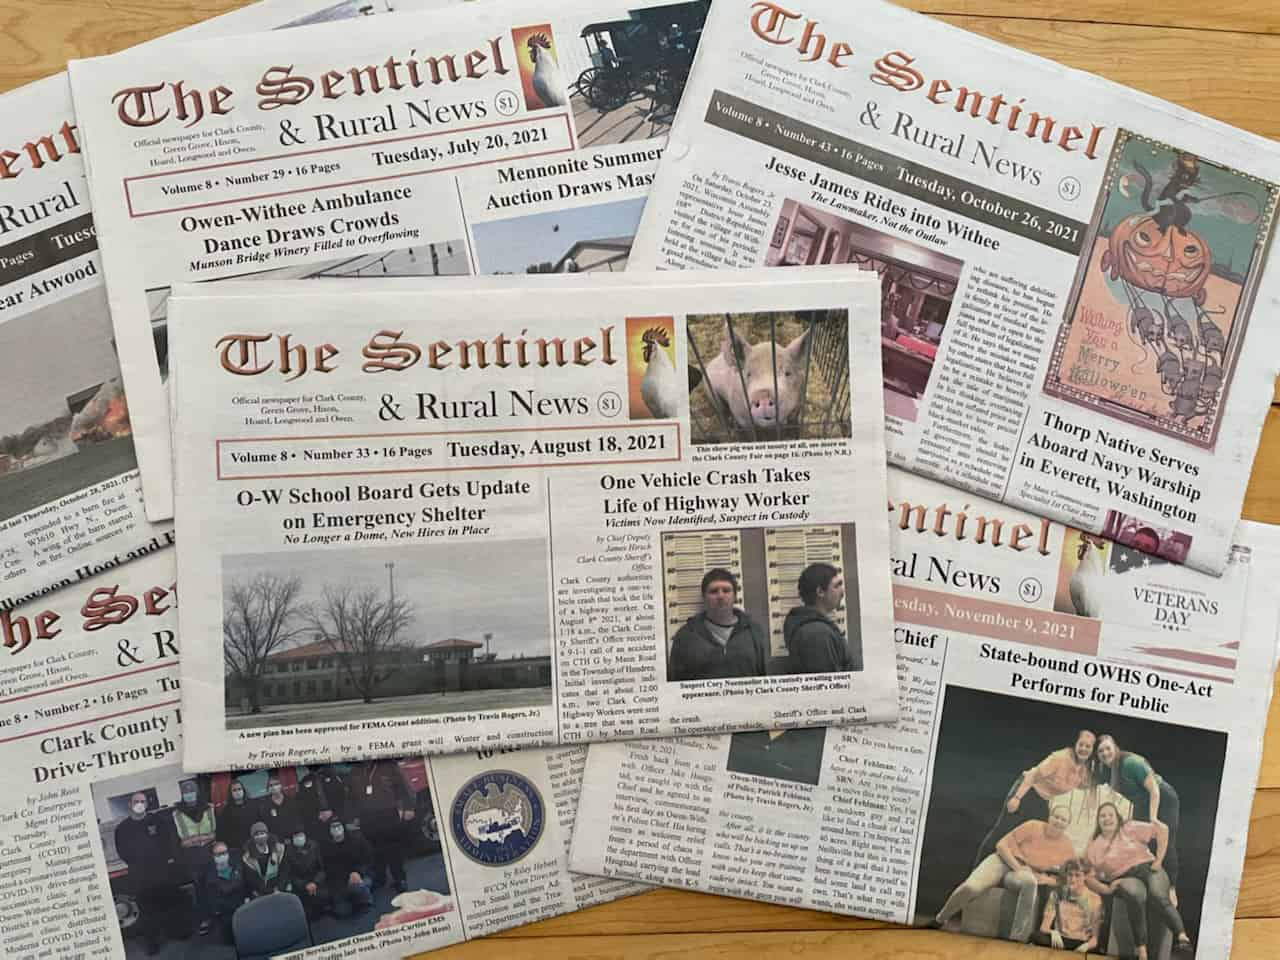 MMC purchases The Sentinel & Rural News